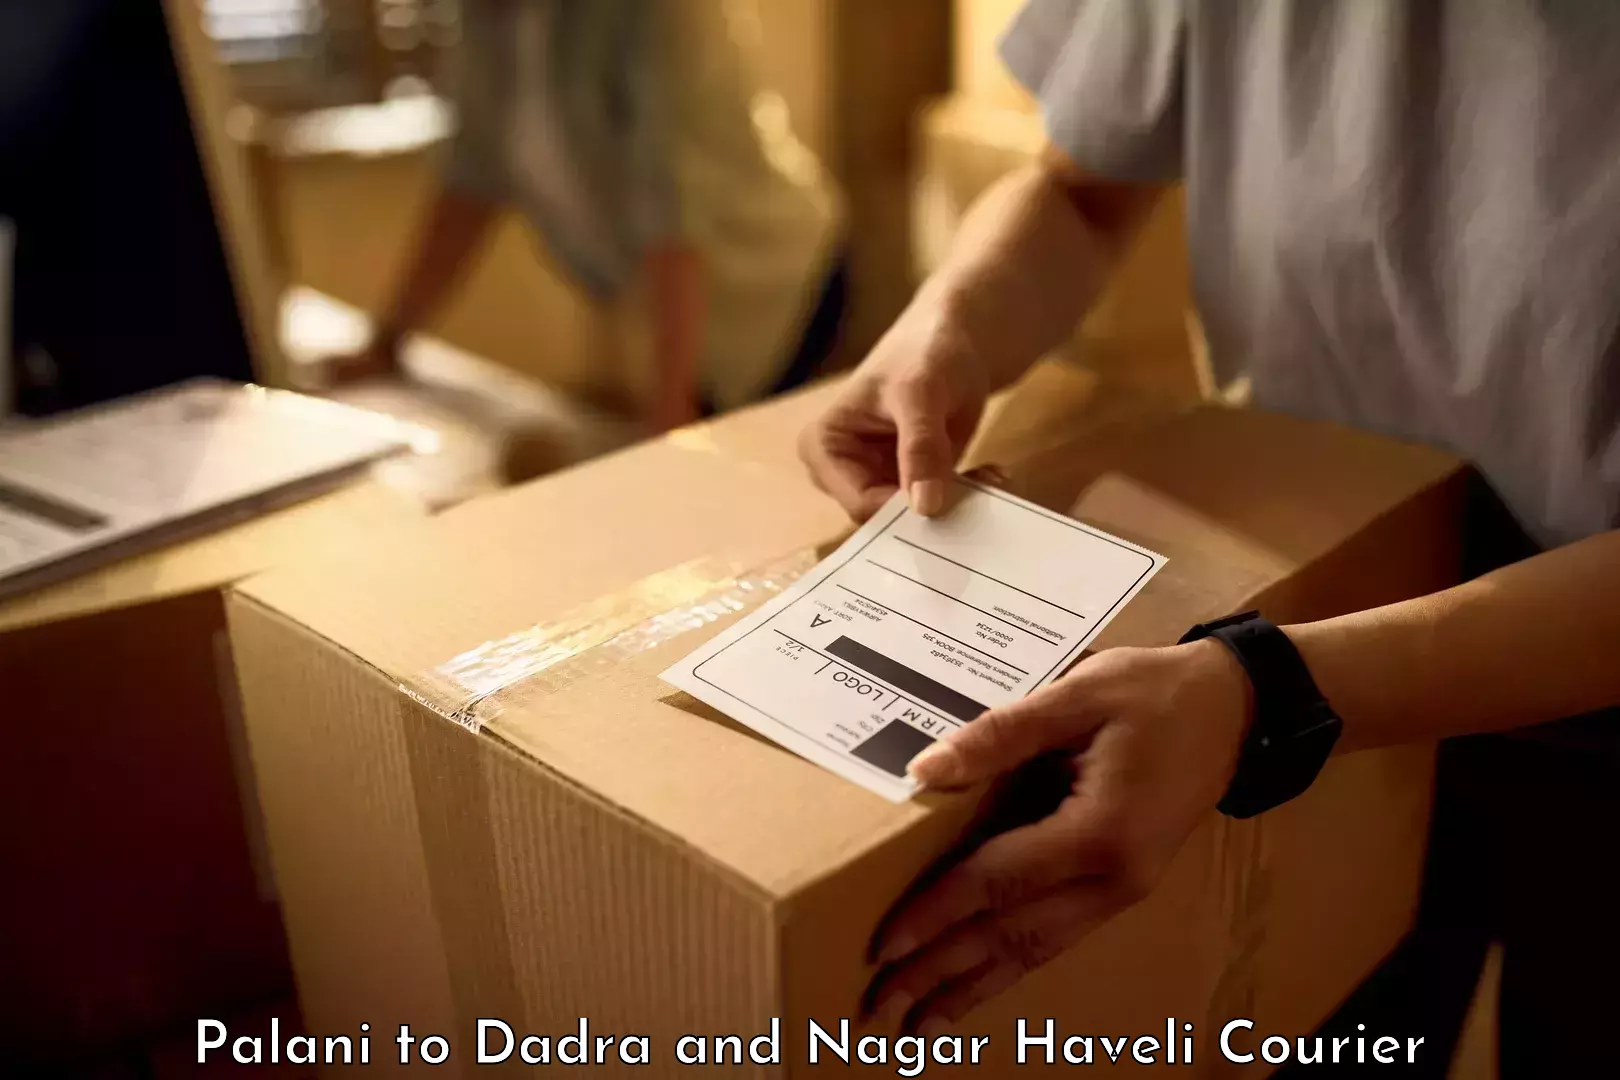 Personal effects shipping in Palani to Silvassa